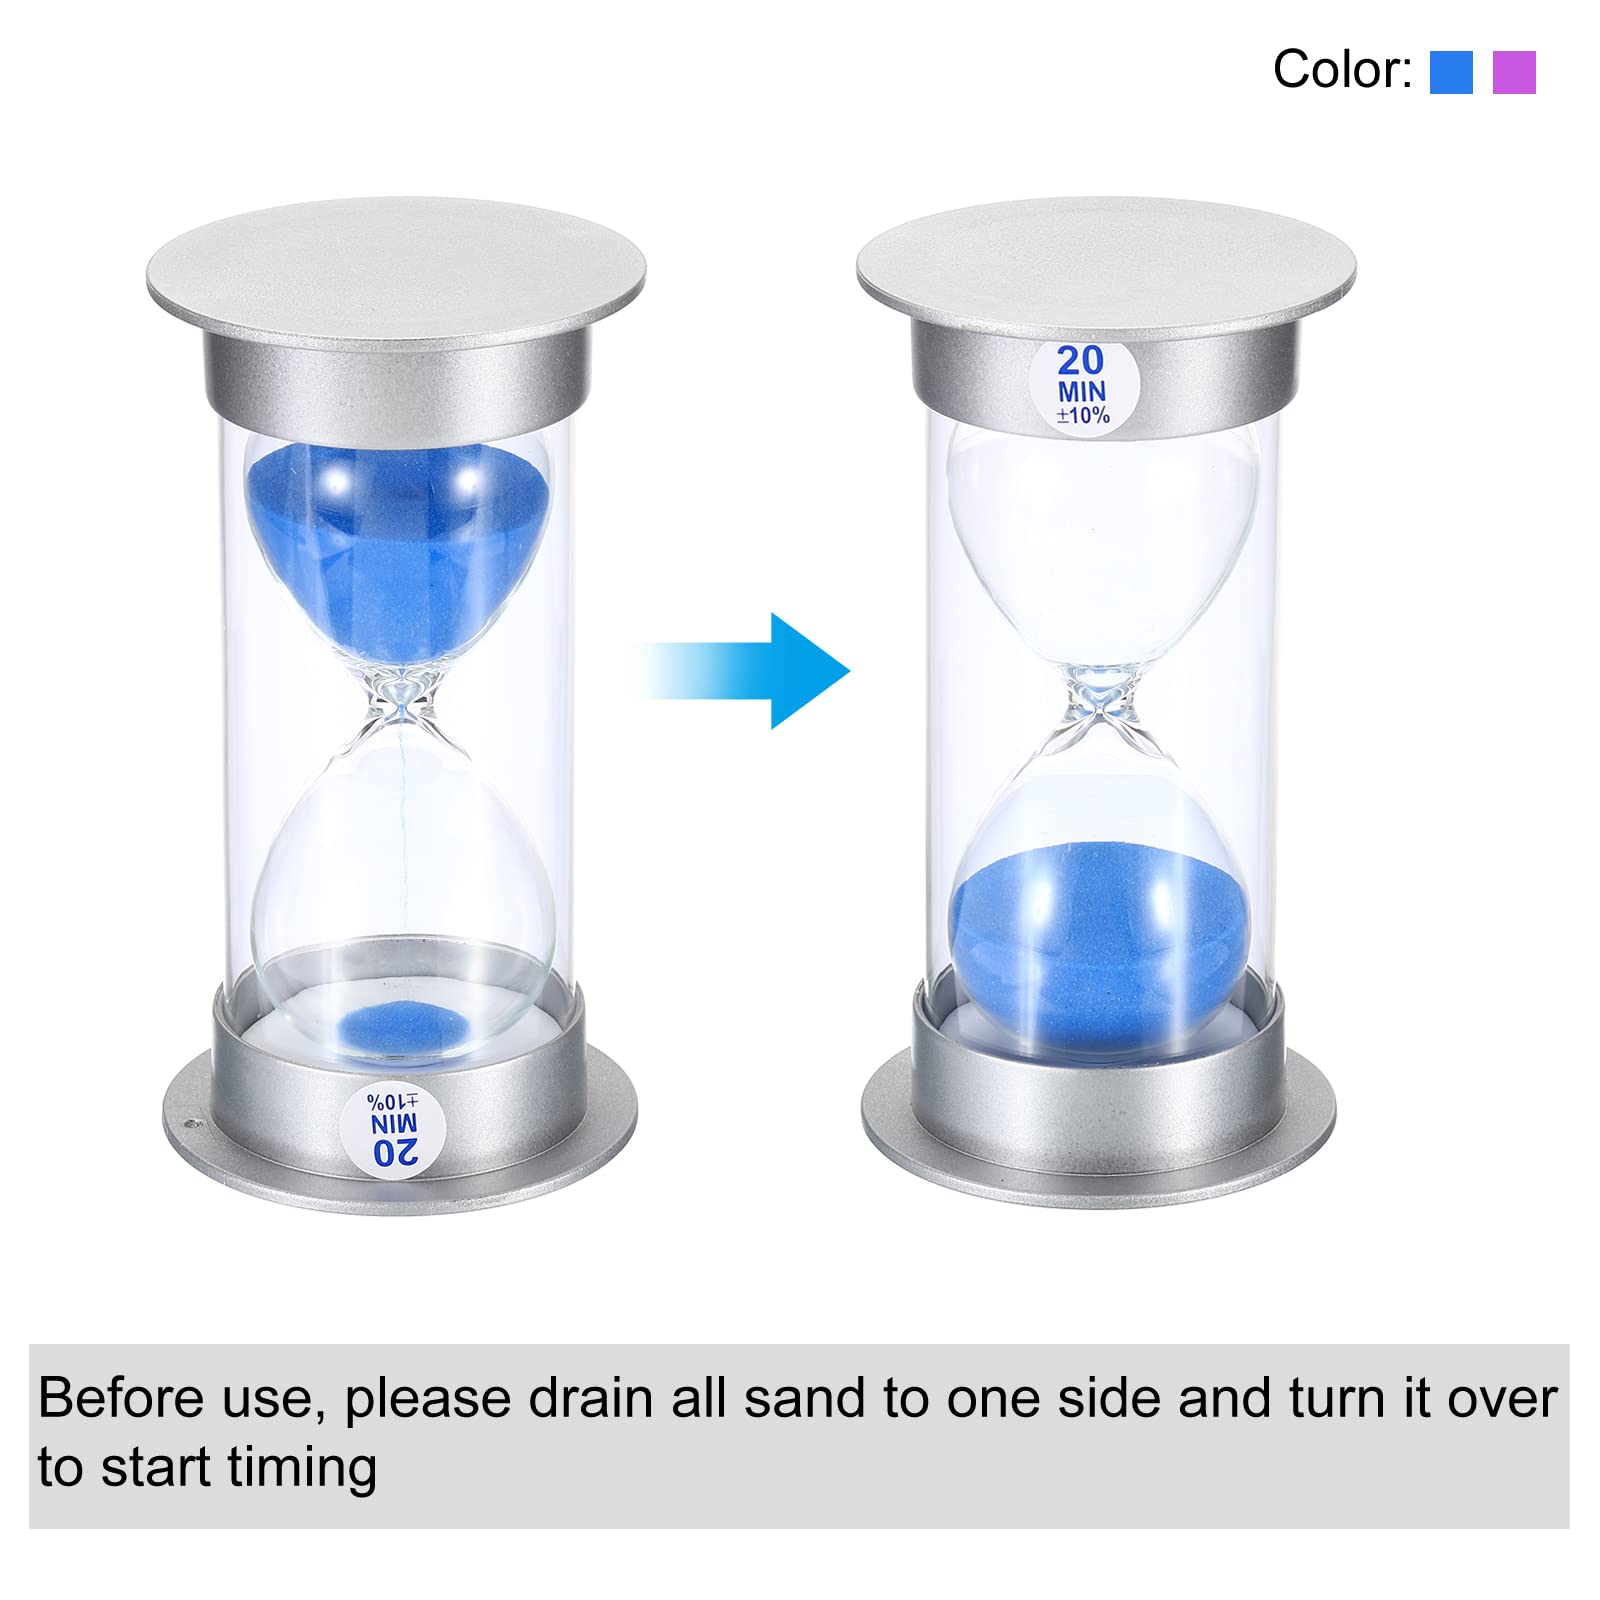 PATIKIL 20 Minute Sand Timer, Sandy Clock with Plastic Cover Count Down Sand Glass for Games, Kitchen, Party Favors DIY Decoration, Blue, Purple Sands